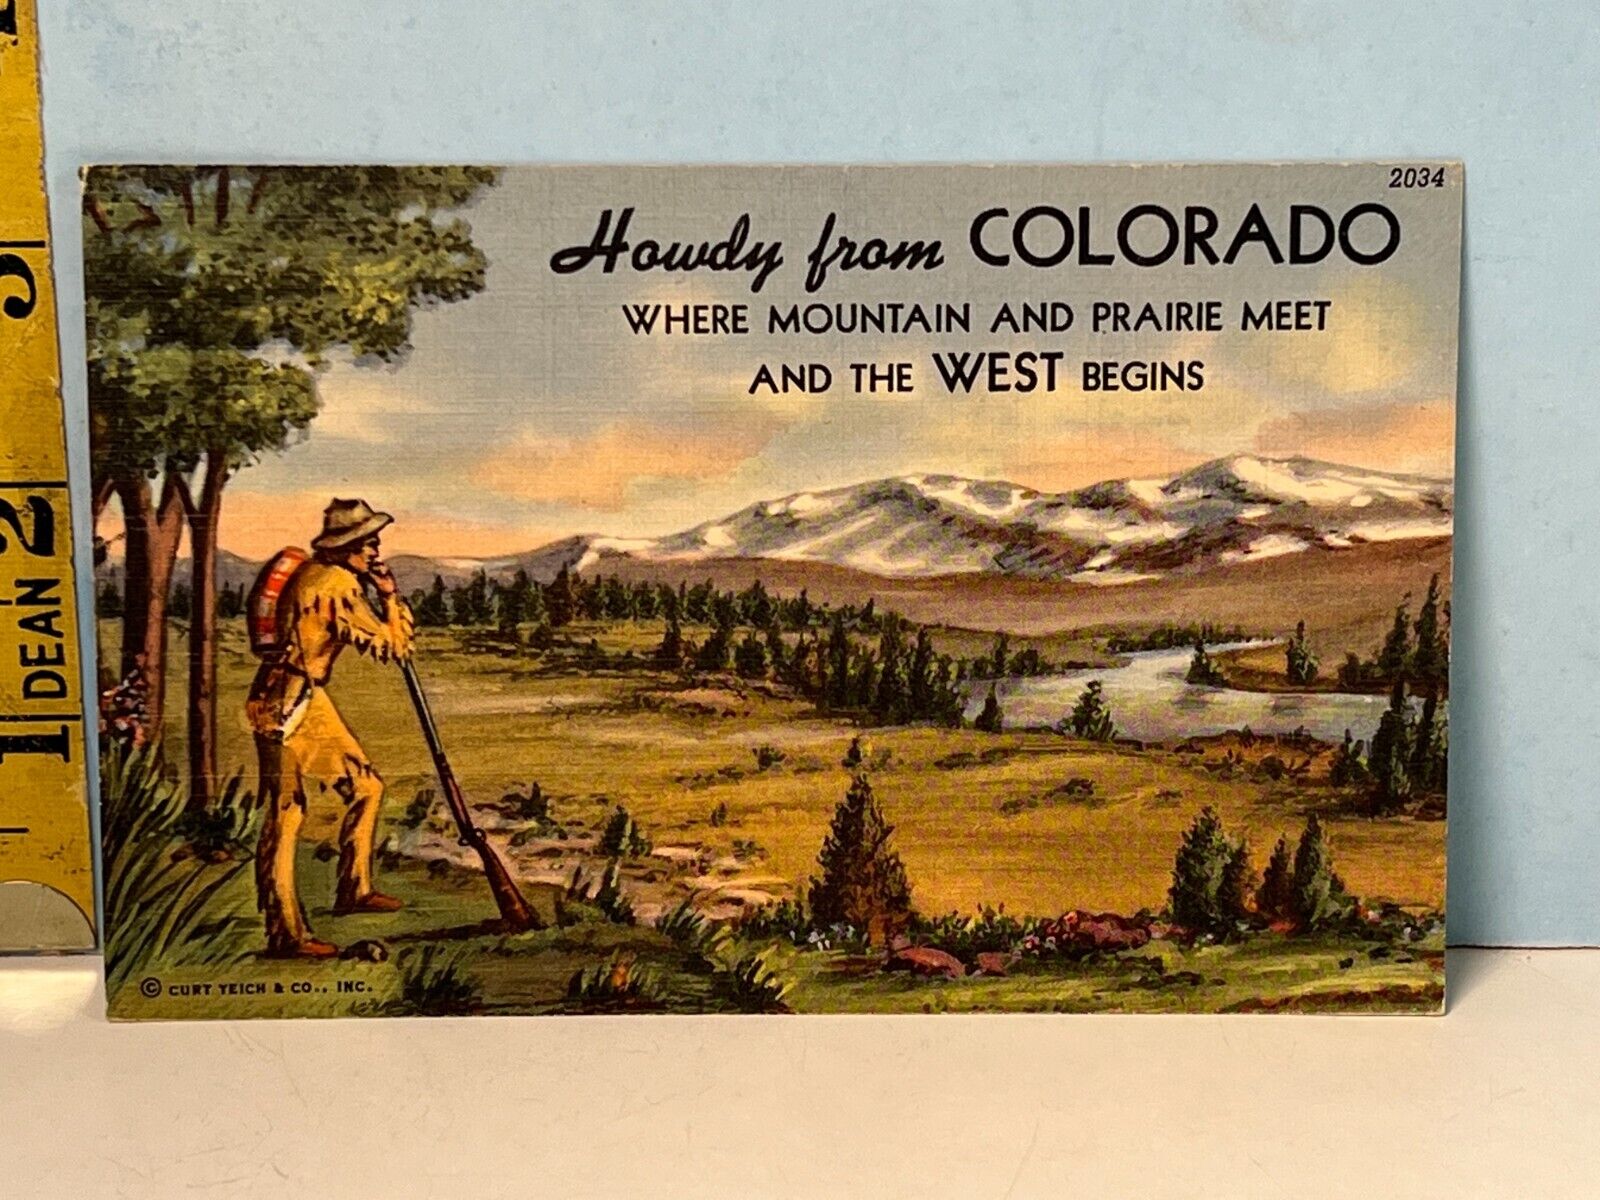 Howdy From Colorado Where Mountains & Prairie meet & the West begins Postcard.